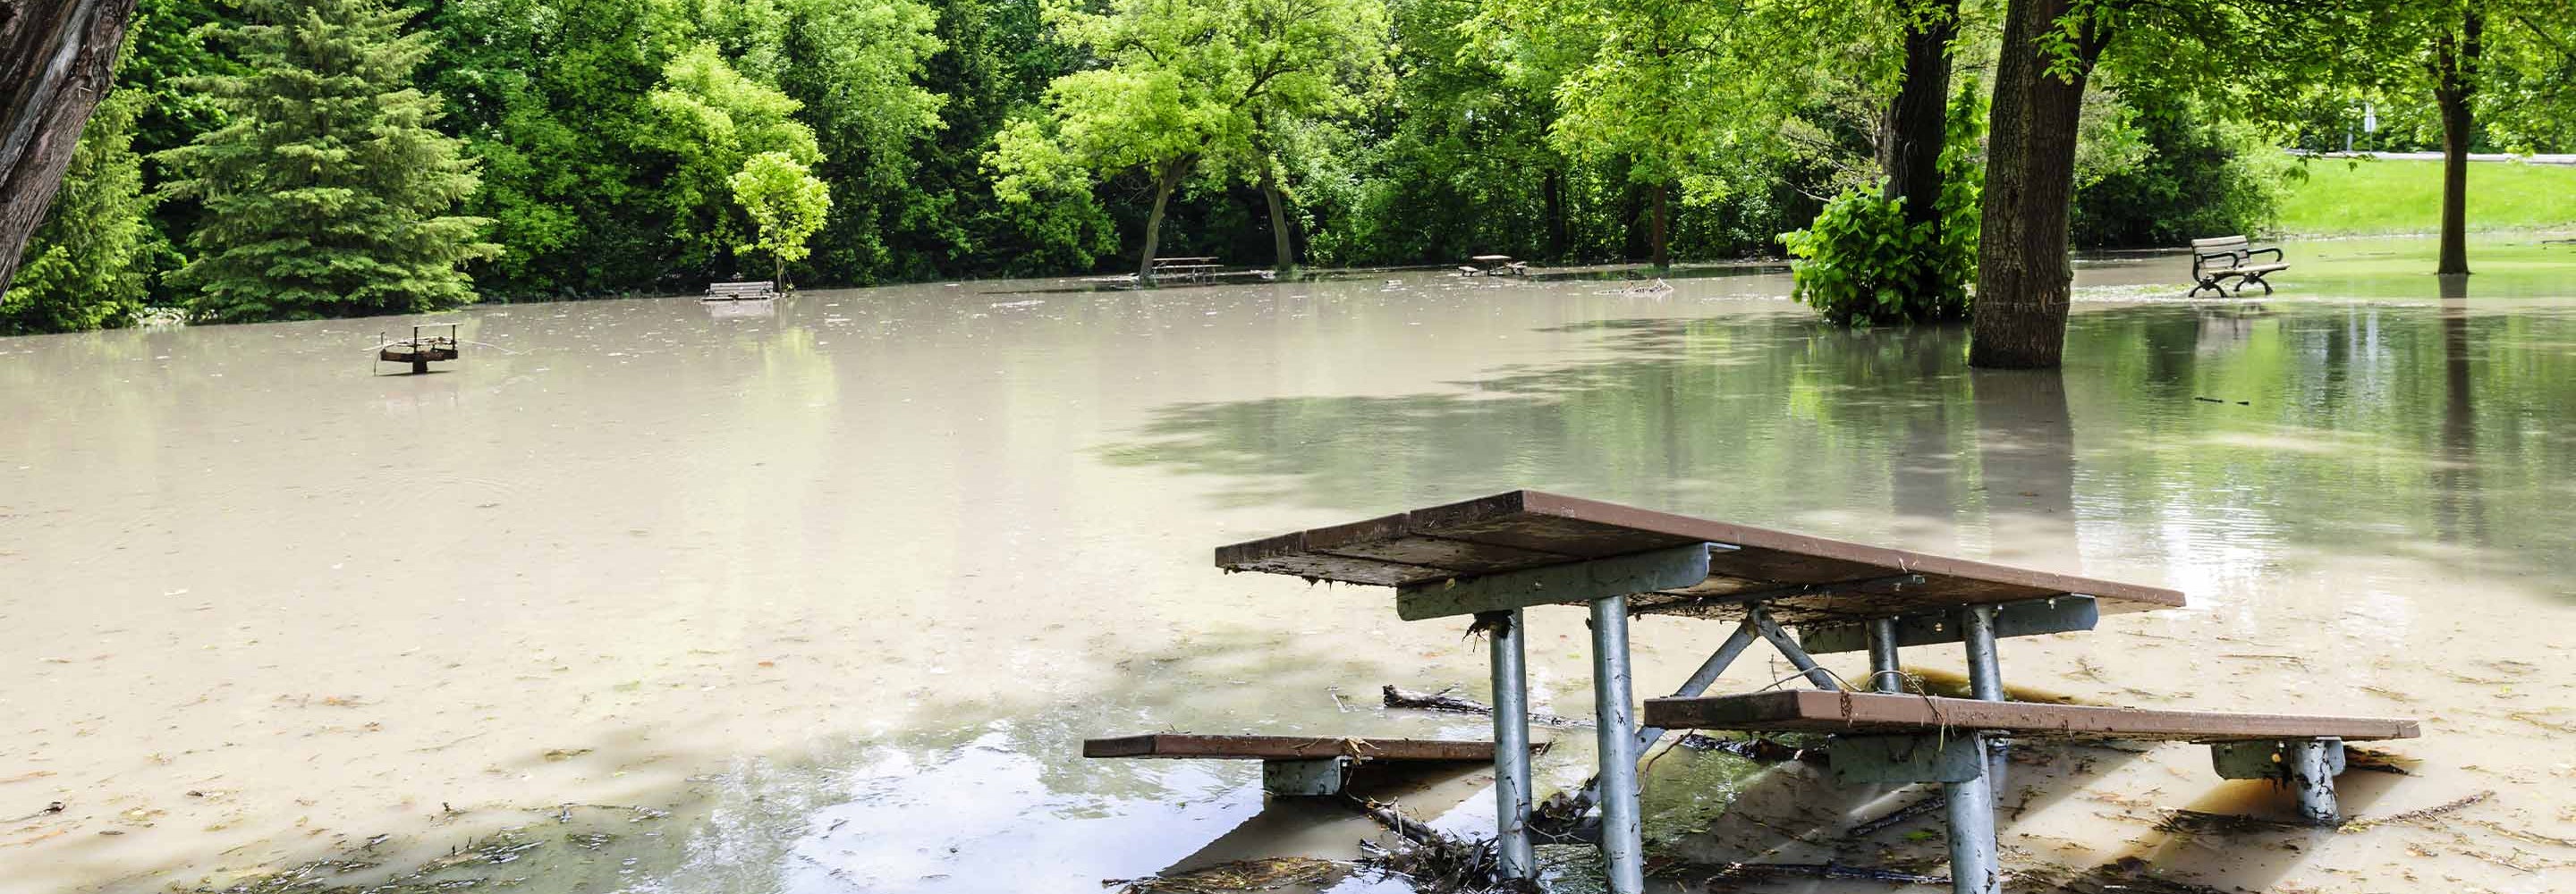 There is flooding in Springfield. Protect yourself from mold and follow health recommendations. Click here. 